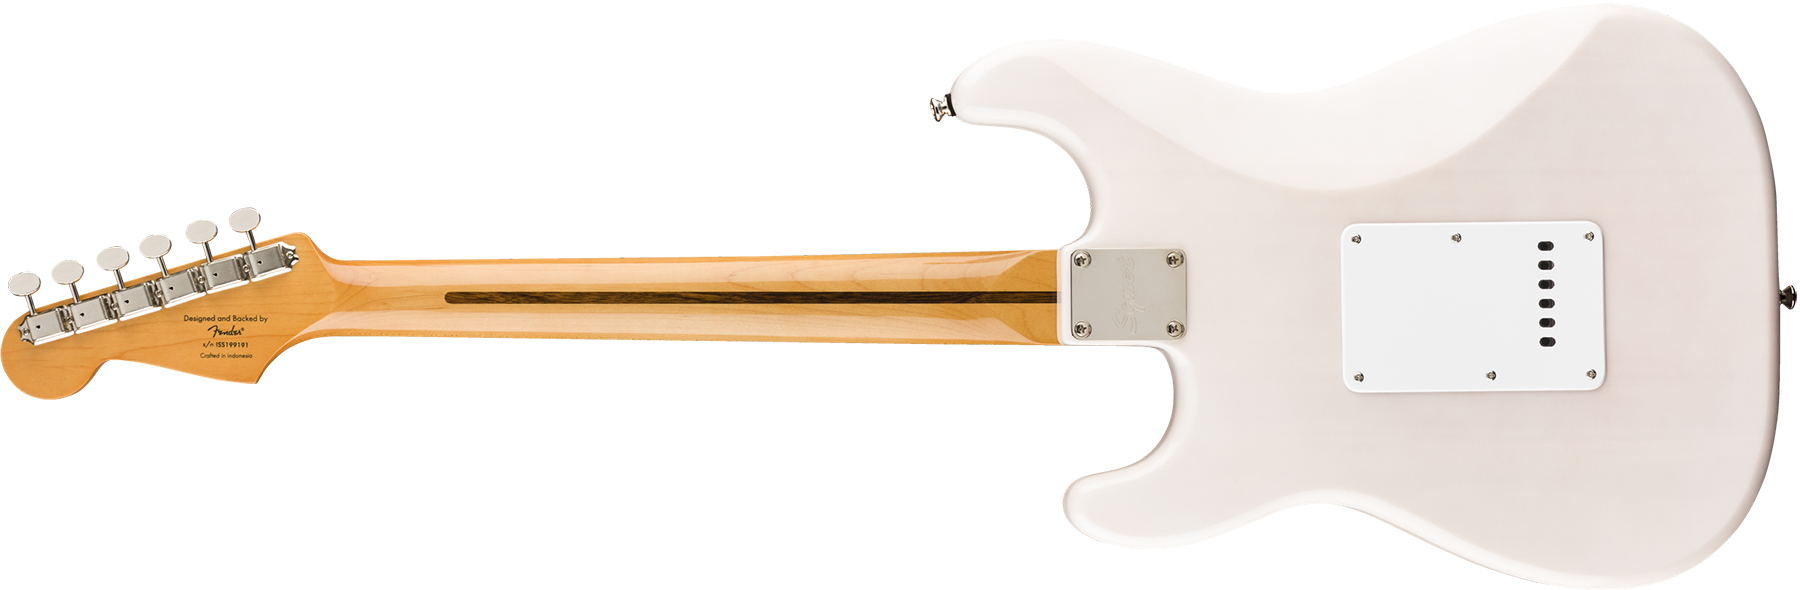 Squier Strat '50s Classic Vibe 2019 Mn 2019 - White Blonde - Str shape electric guitar - Variation 1